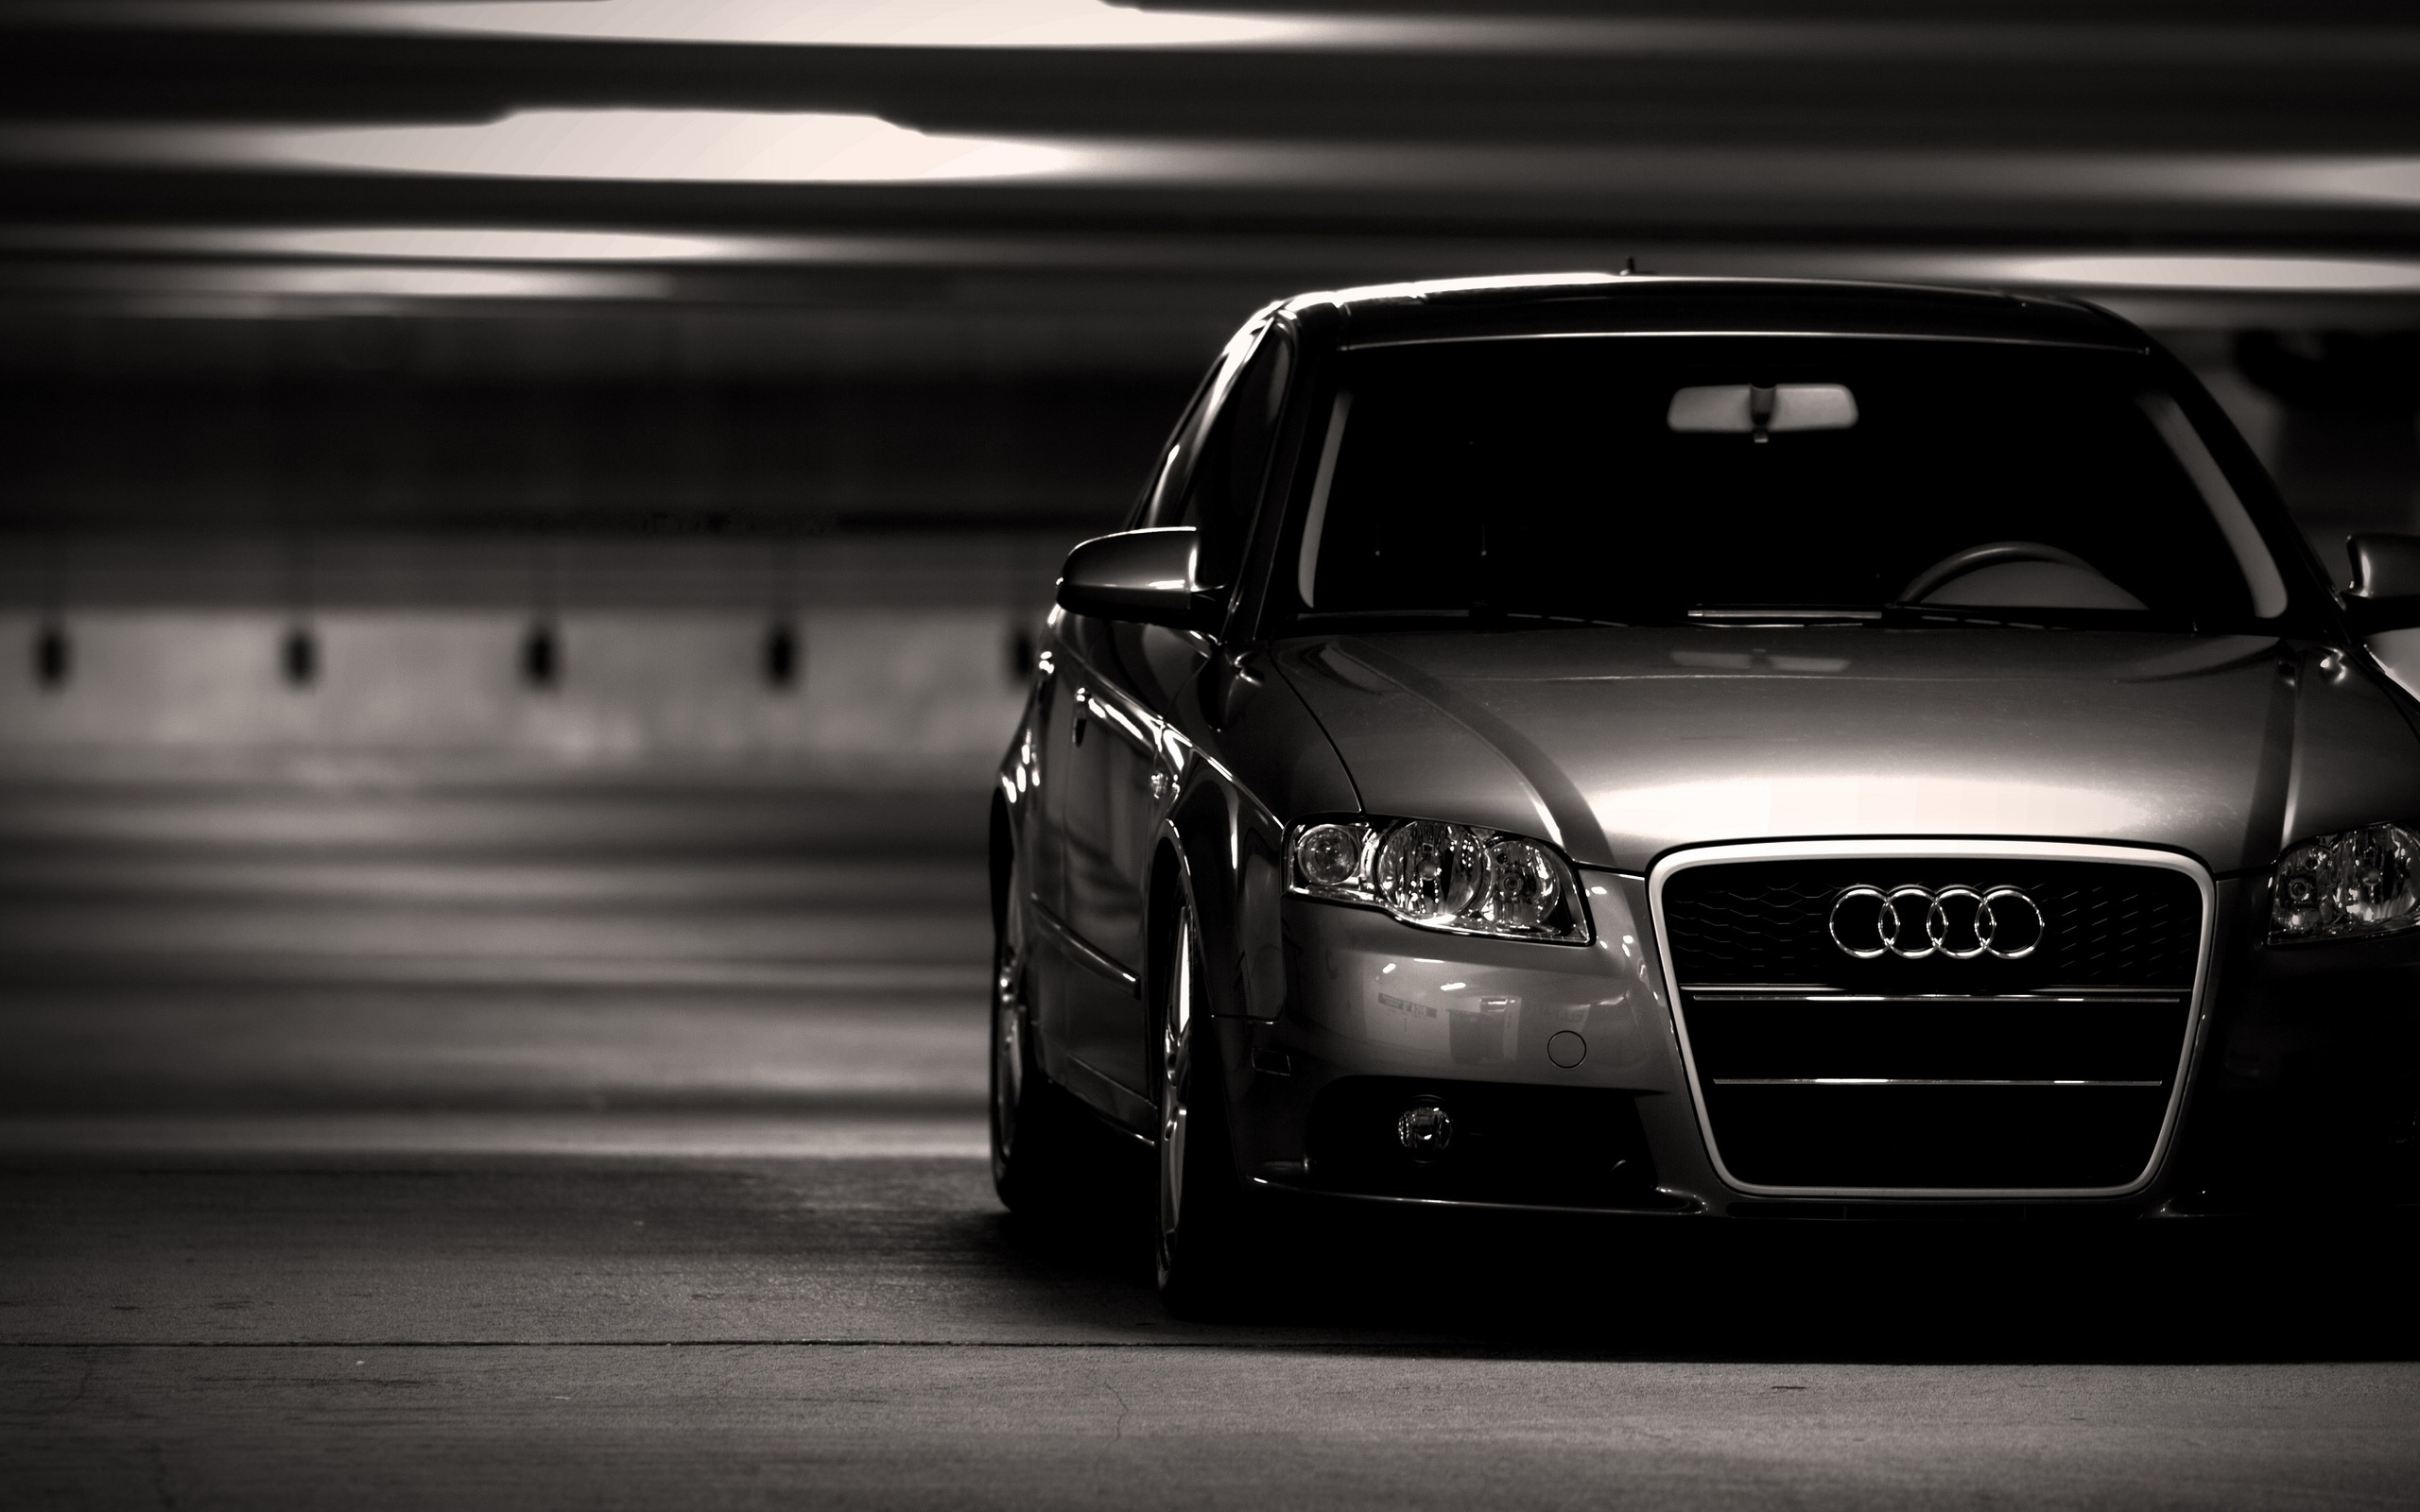 Free download Audi A4 HD Wallpaper Background [2560x1600] for your Desktop, Mobile & Tablet. Explore Audi A4 Wallpaper. Audi Wallpaper for Desktop, Audi Wallpaper High Resolution, Audi A6 Wallpaper